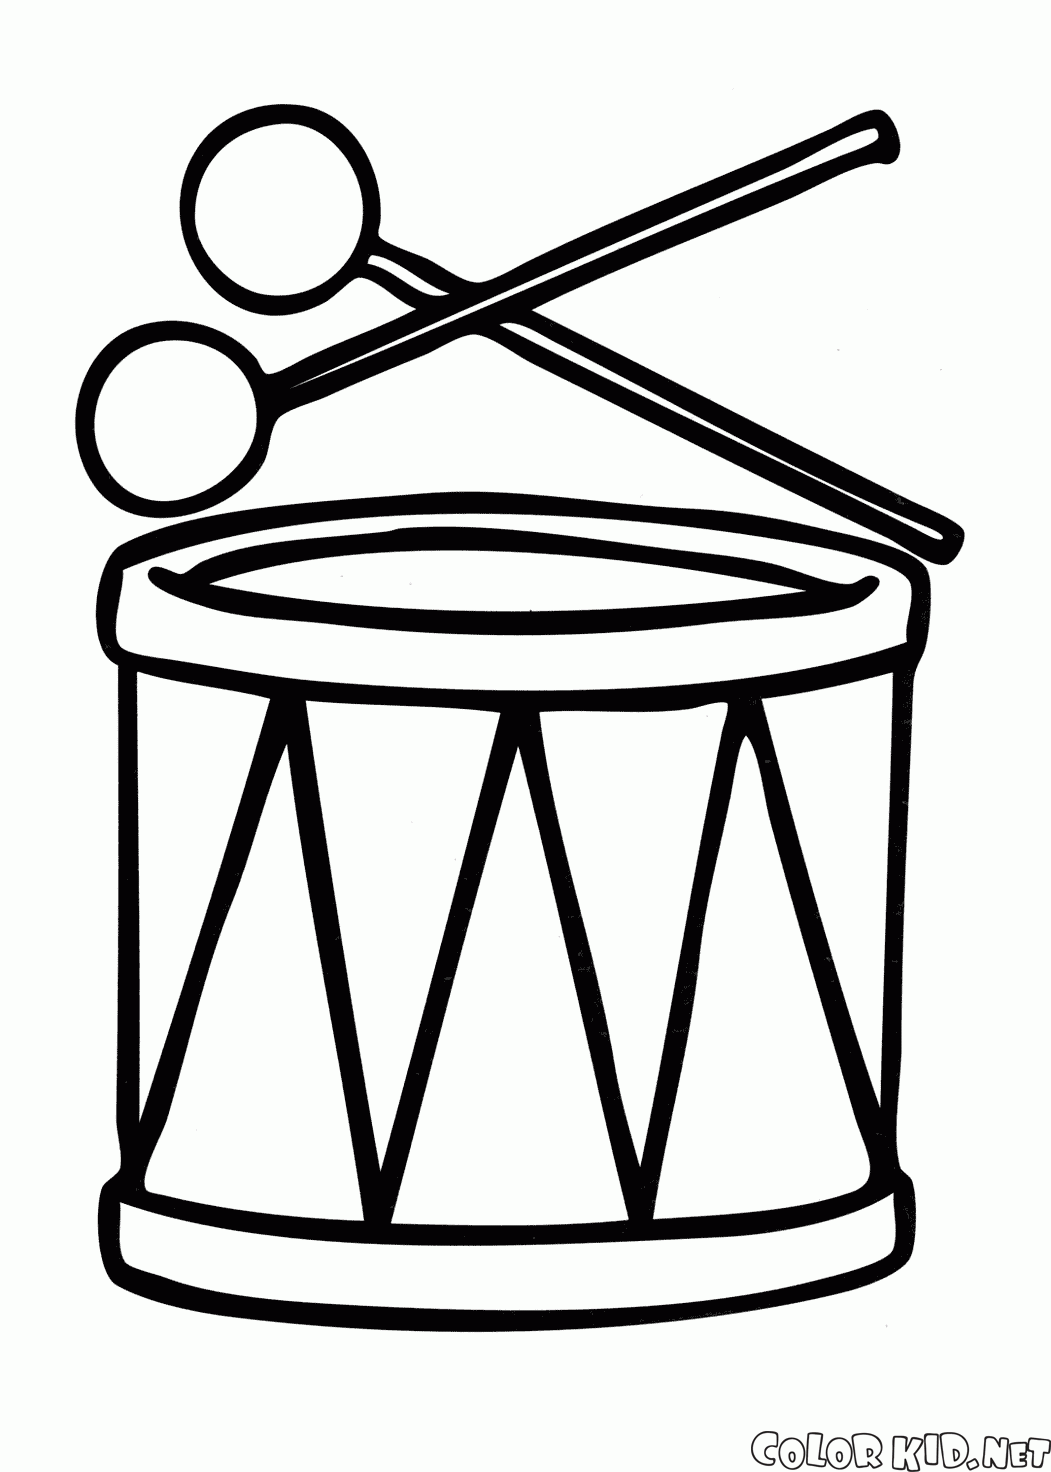 Free Drum Coloring Page, Download Free Clip Art, Free Clip Art on ...